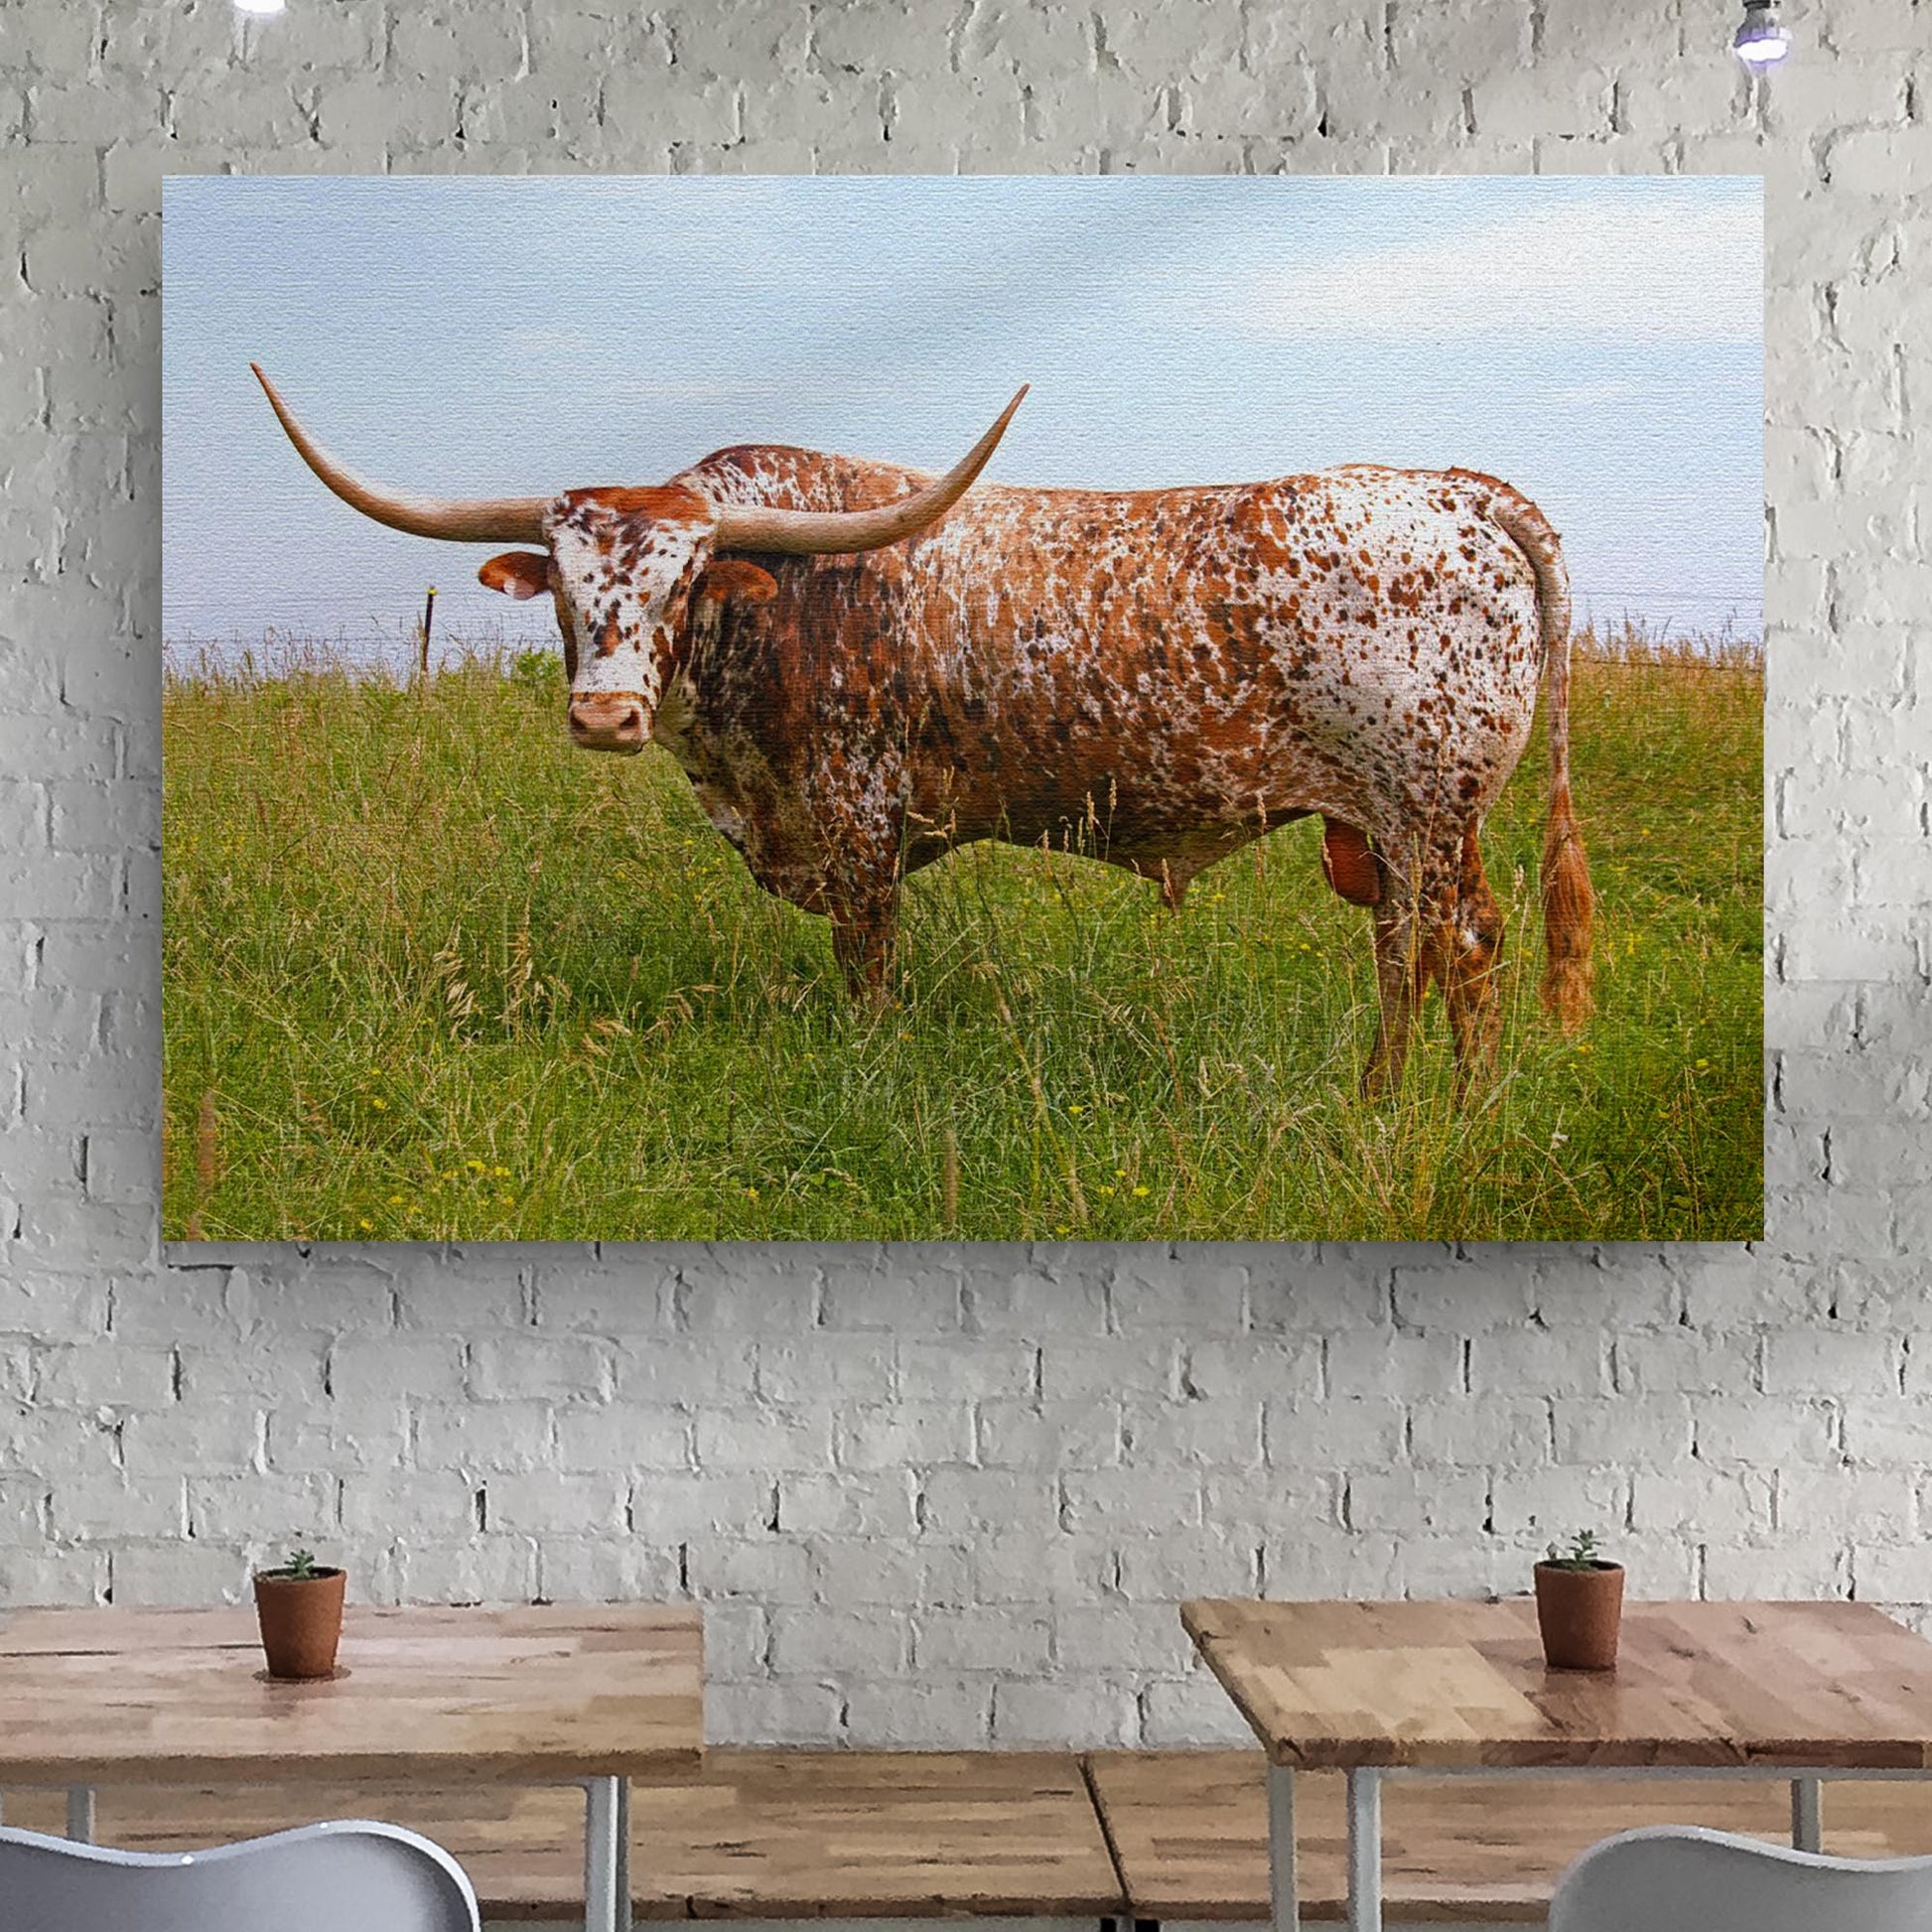 Texas Longhorn Cattle Canvas Wall Art Style 1 - Image by Tailored Canvases